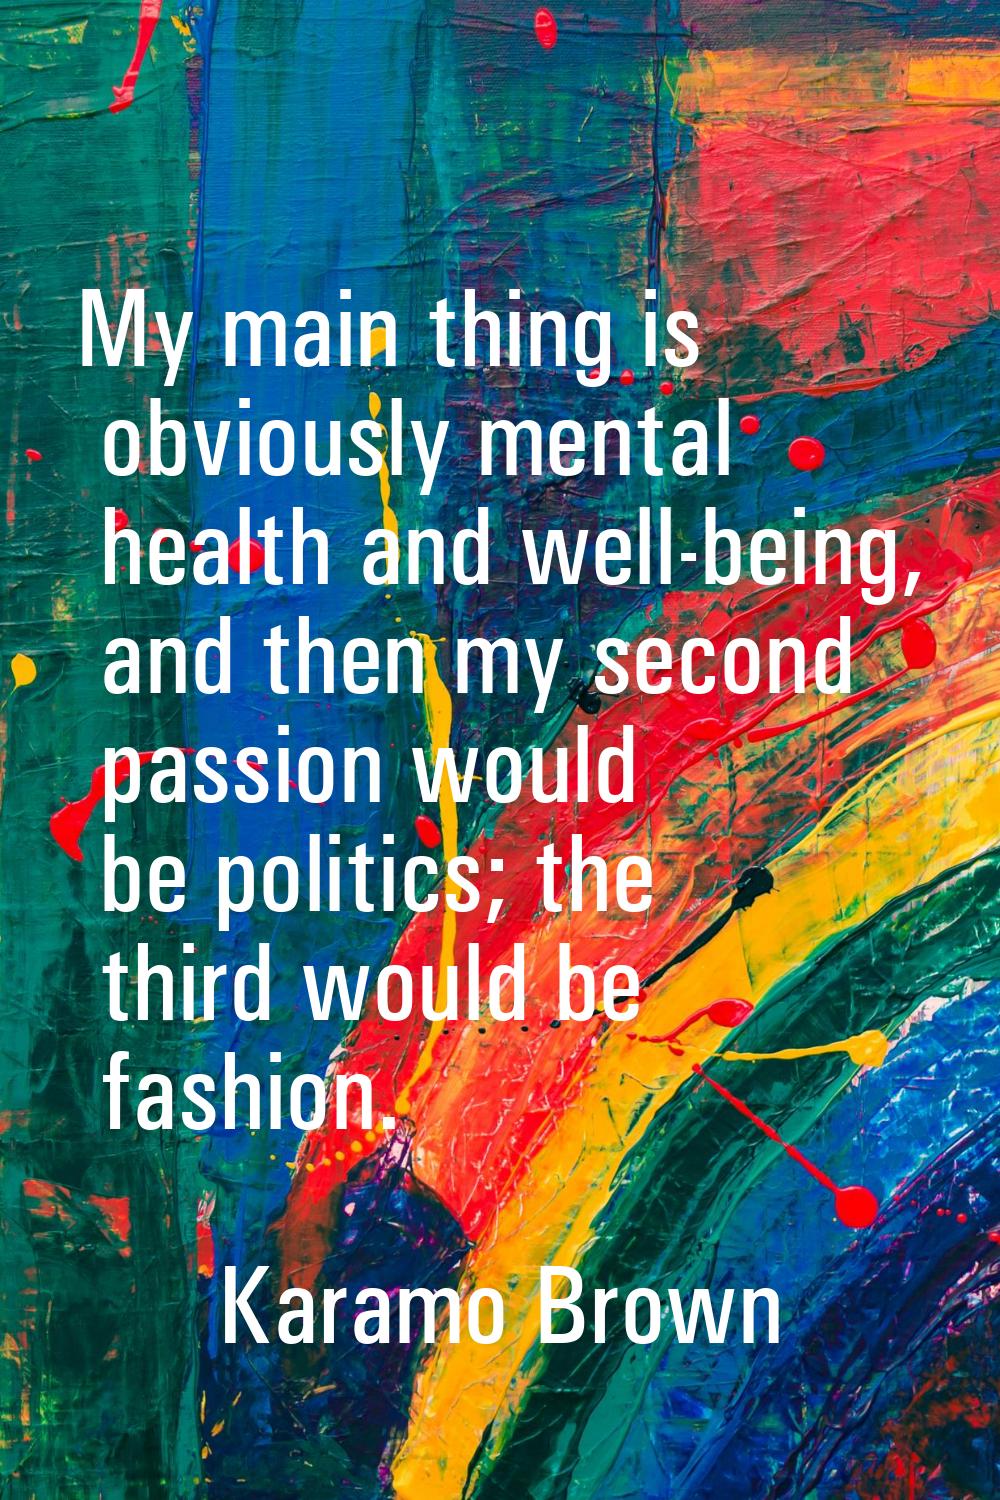 My main thing is obviously mental health and well-being, and then my second passion would be politi